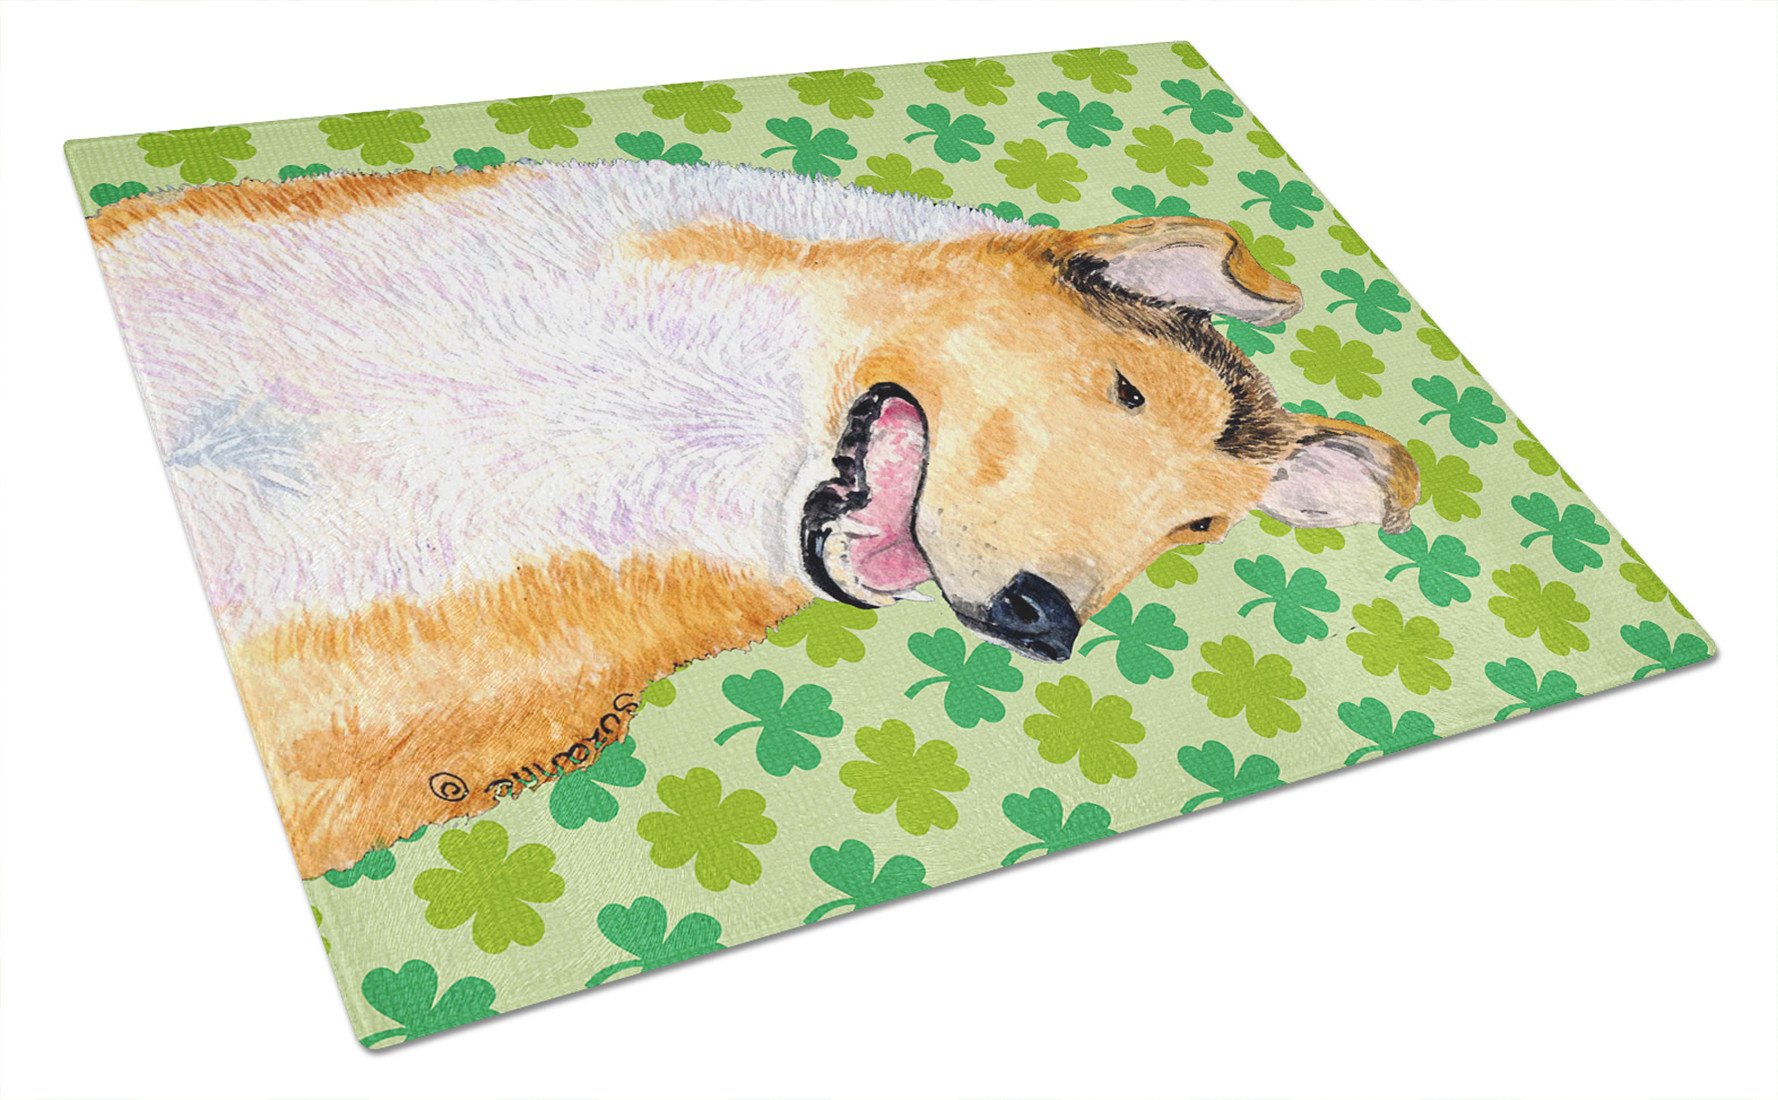 Collie Smooth St. Patrick's Day Shamrock Portrait Glass Cutting Board Large by Caroline's Treasures